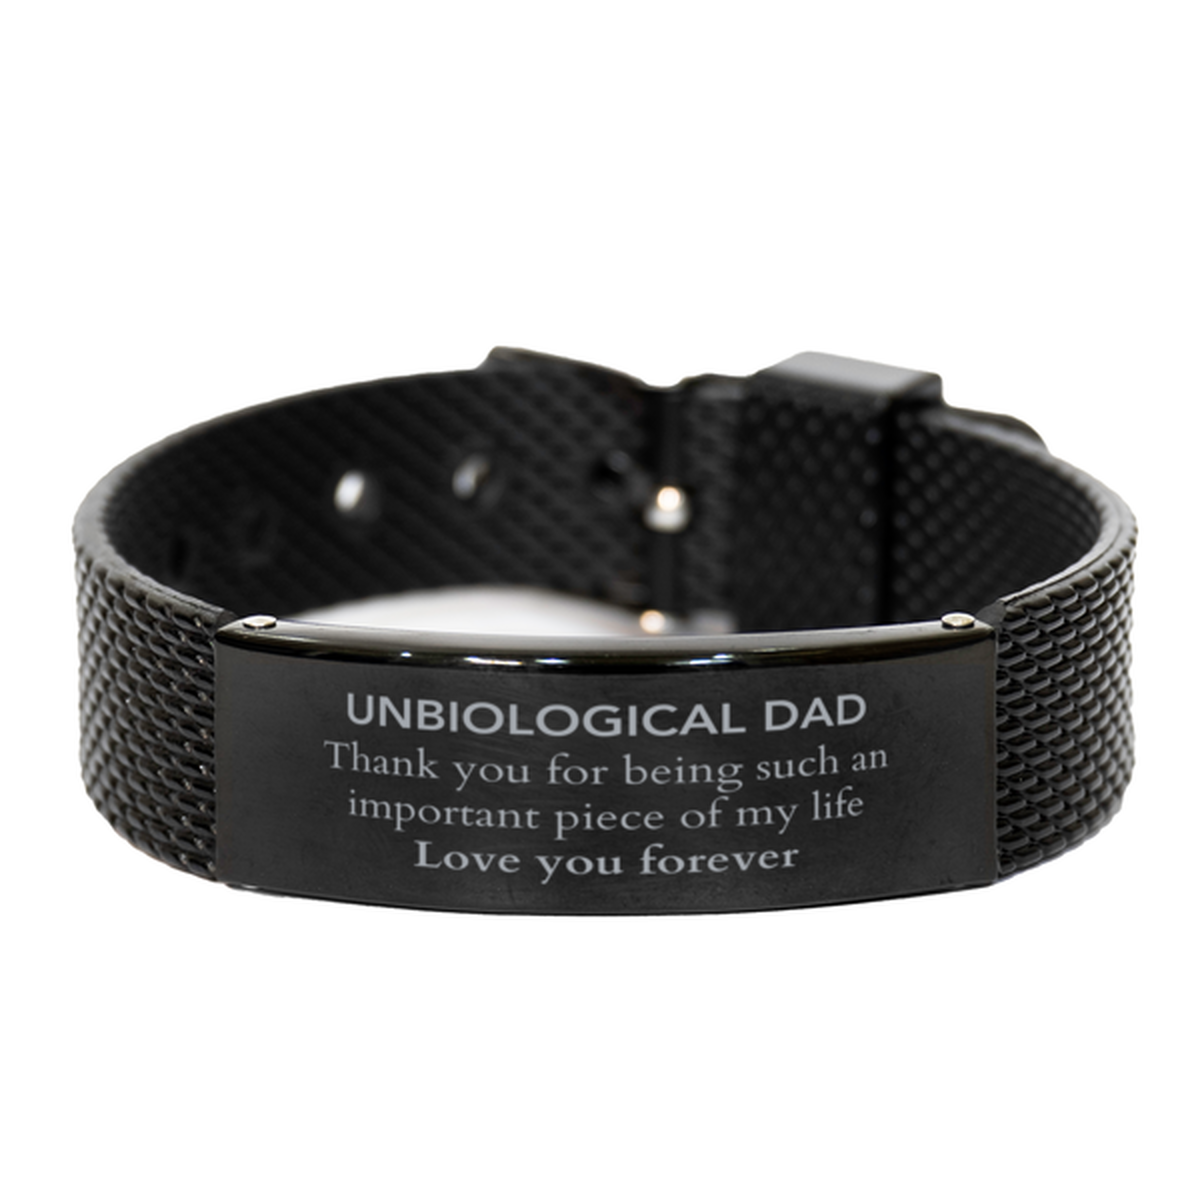 Appropriate Unbiological Dad Black Shark Mesh Bracelet Epic Birthday Gifts for Unbiological Dad Thank you for being such an important piece of my life Unbiological Dad Christmas Mothers Fathers Day